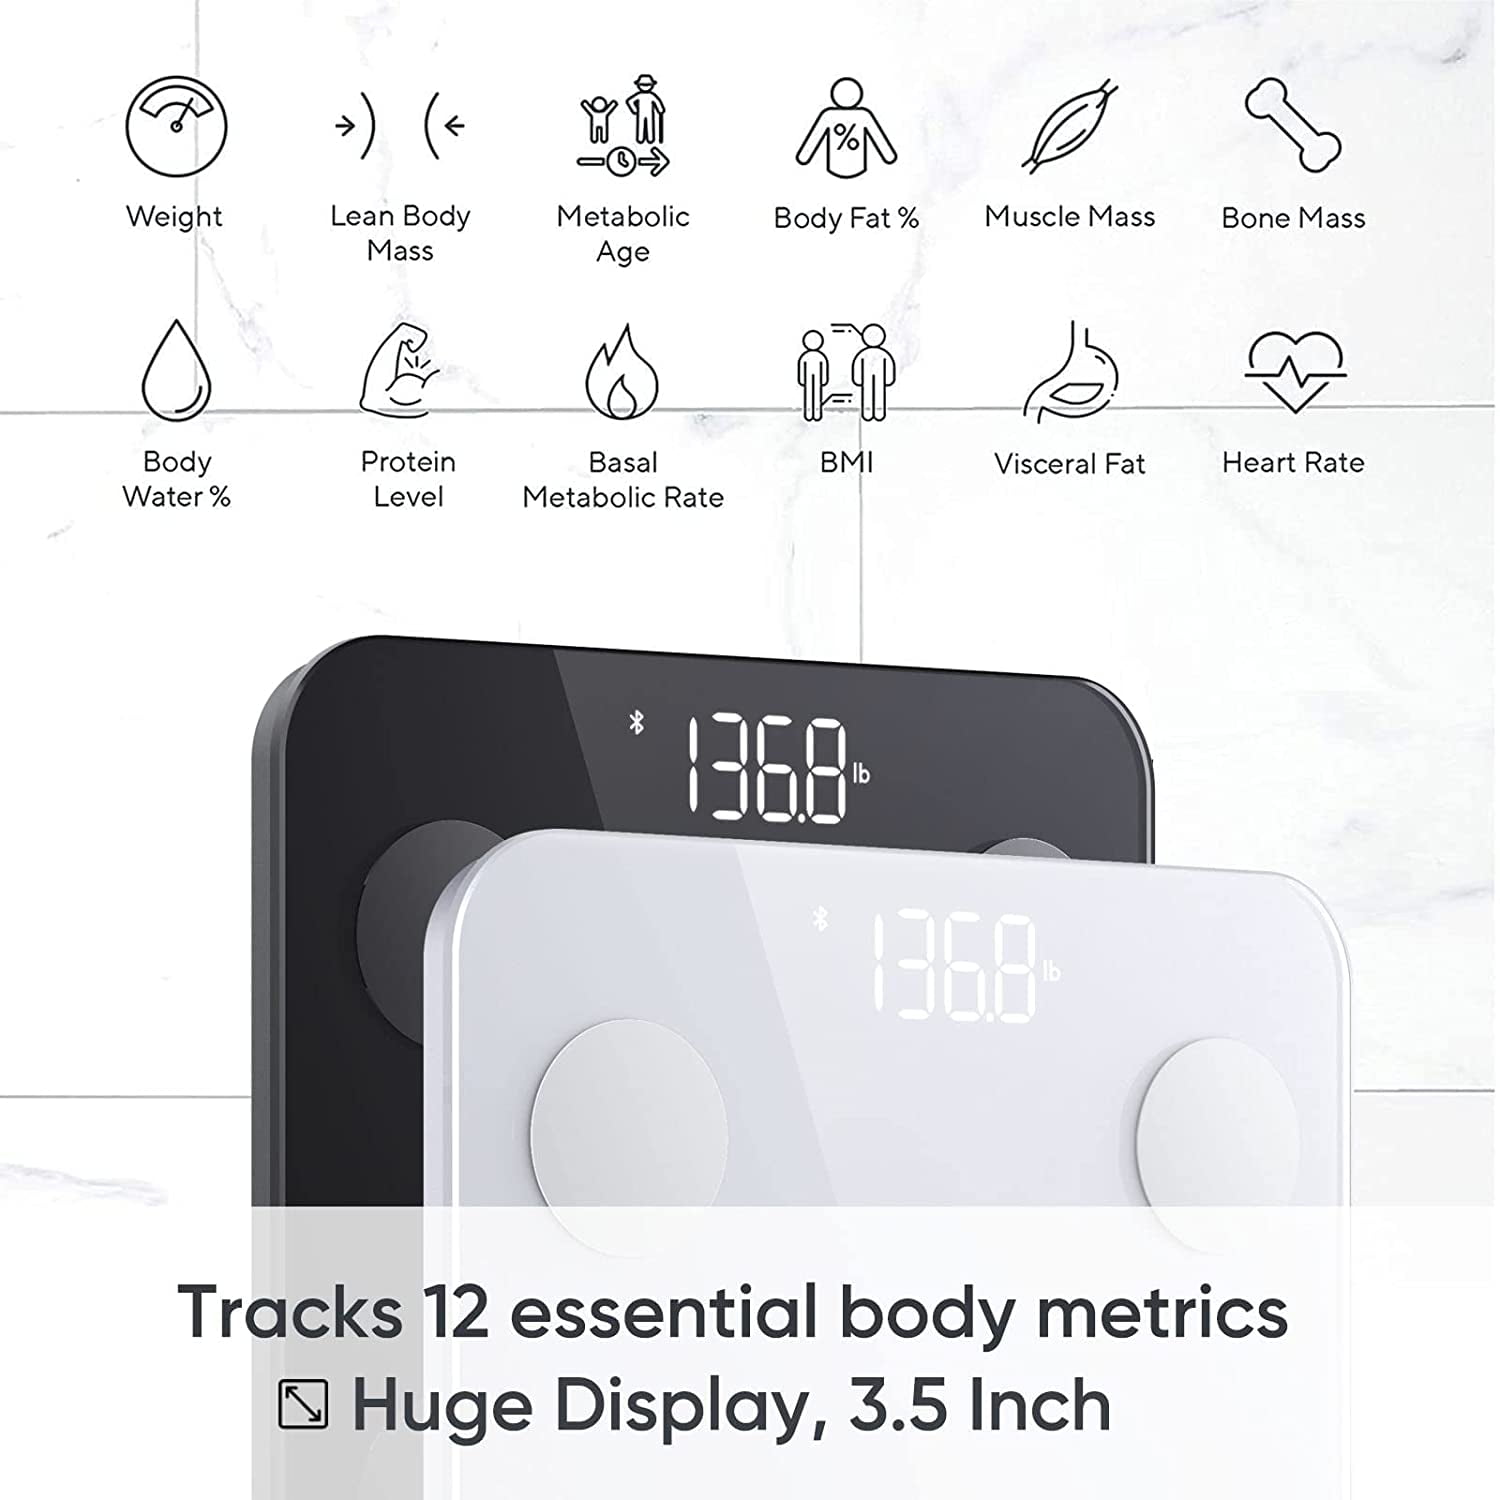 WYZE Smart Scale X for Body Weight, Digital Bathroom Scale for BMI, Body  Fat, Water and Muscle, Heart Rate Monitor, Body Composition Analyzer for